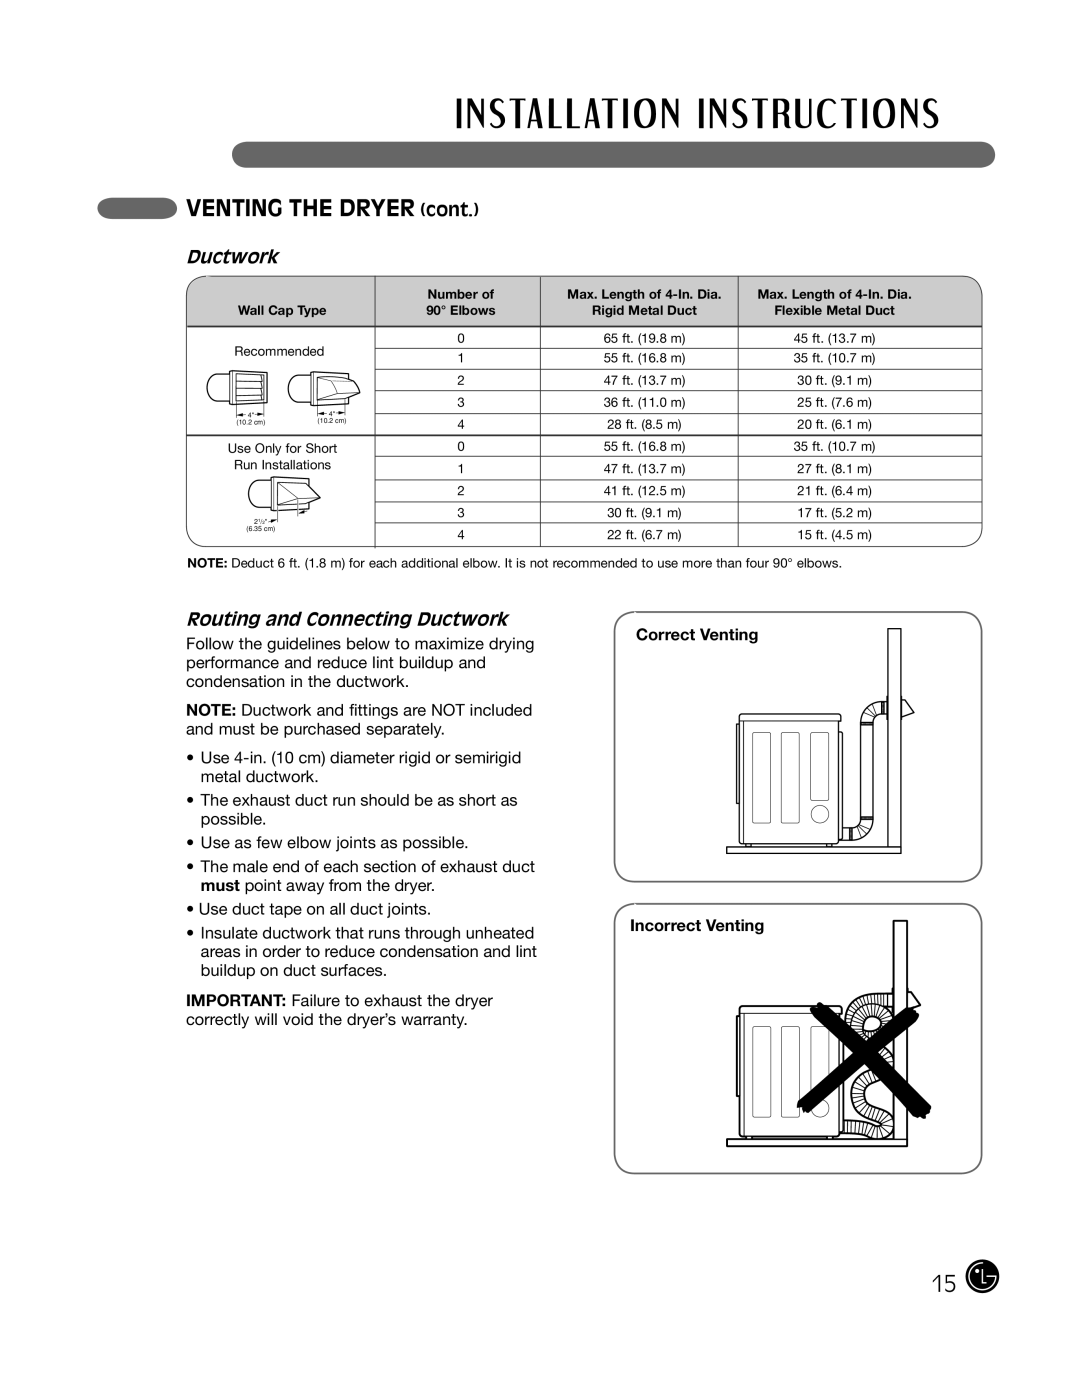 LG Electronics P154 manual VENTING THE DRYER cont, Routing and Connecting Ductwork 